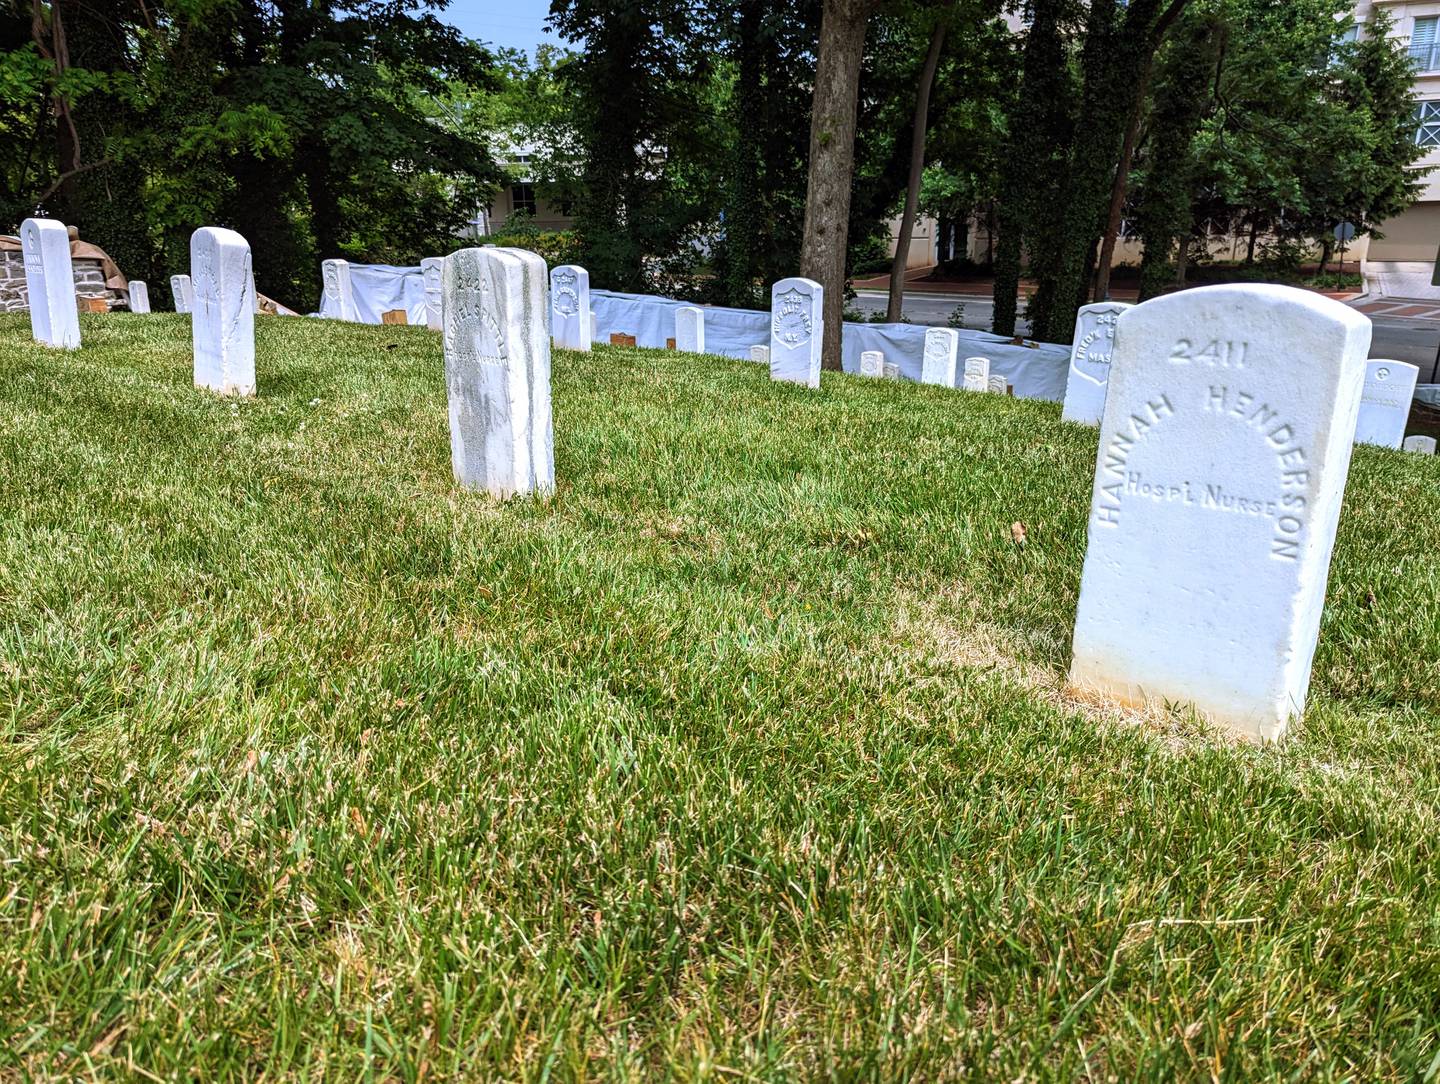 Hannah Henderson, Rachel Spittle and Mrs. J. Broad are buried at Annapolis National Cemetery, Civil War nurses who died in months of each other in 1863.